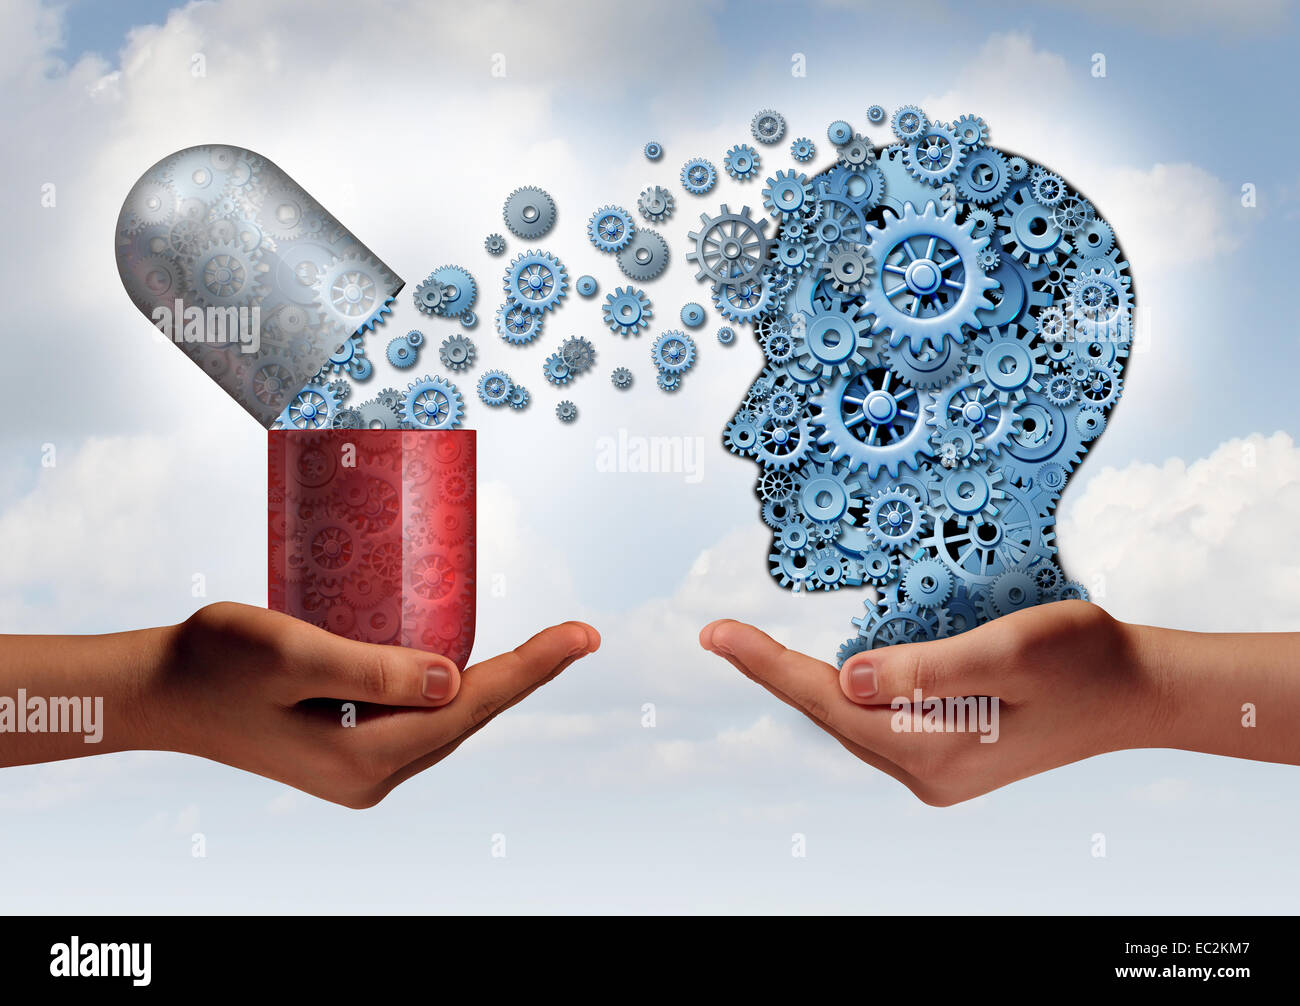 Brain medicine mental health care concept as hands holding an open pill capsule releasing gears to a human head made of machine Stock Photo